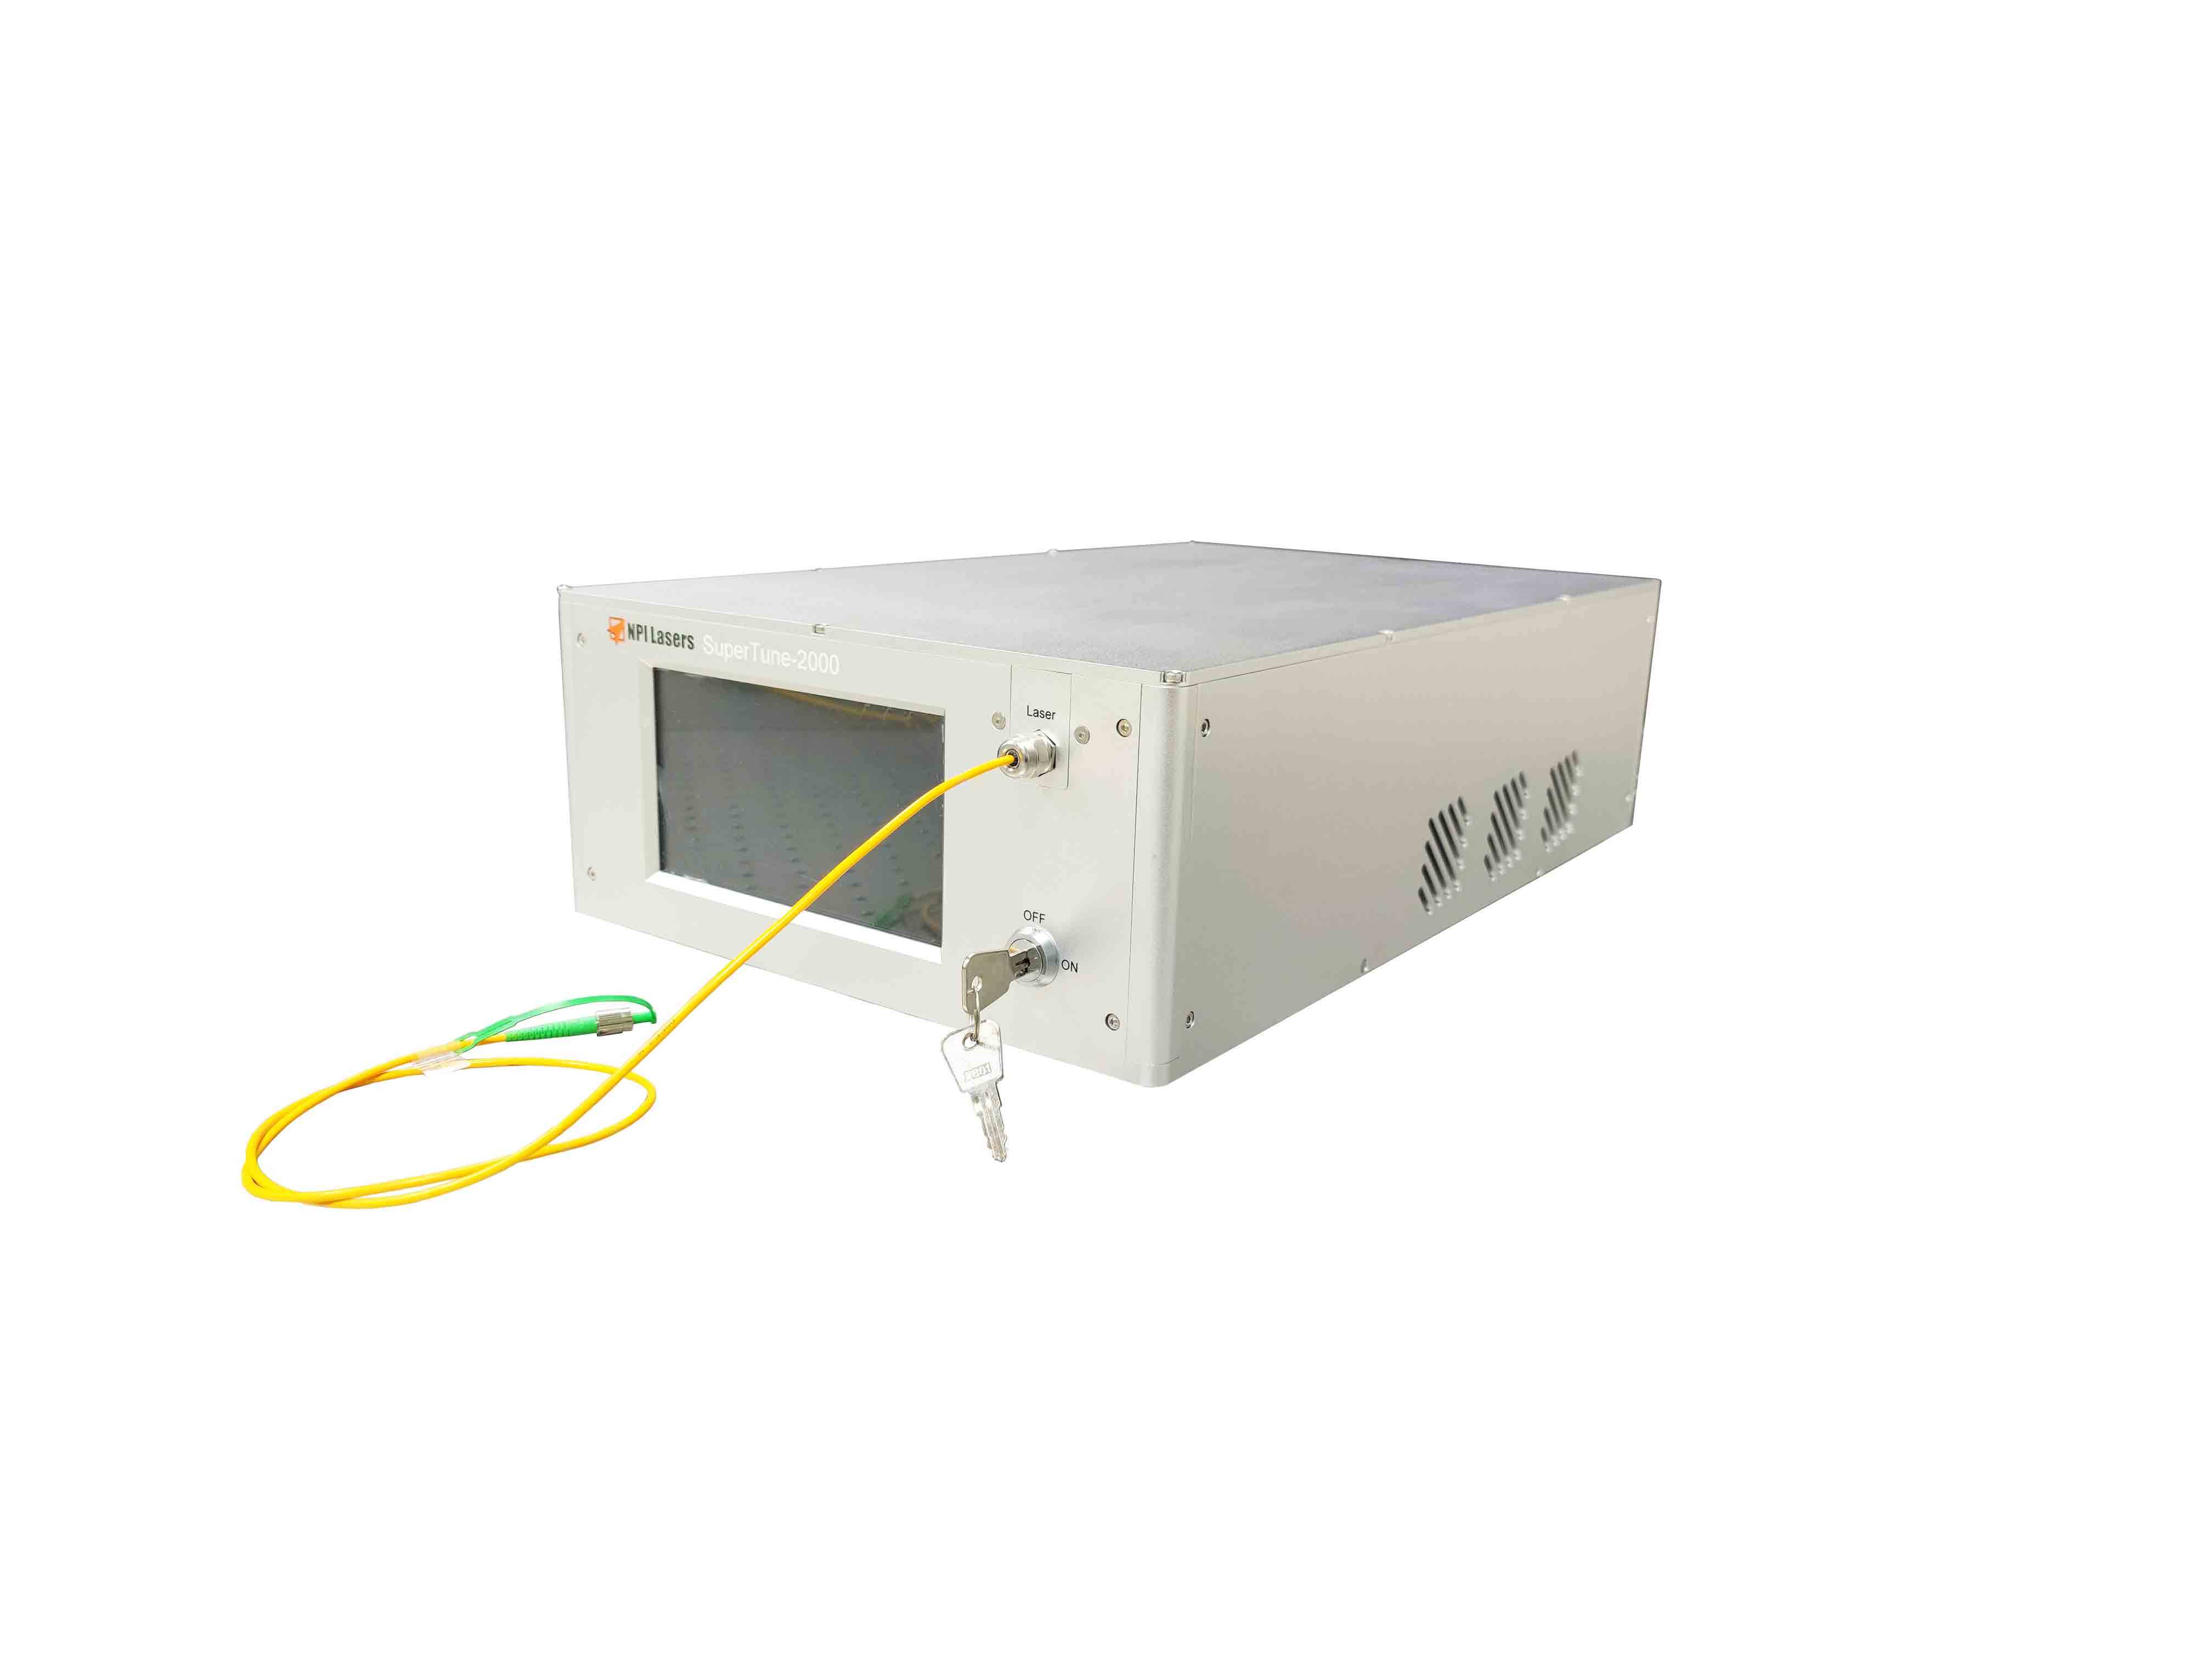 2000 nm Widely Tunable Fiber Laser